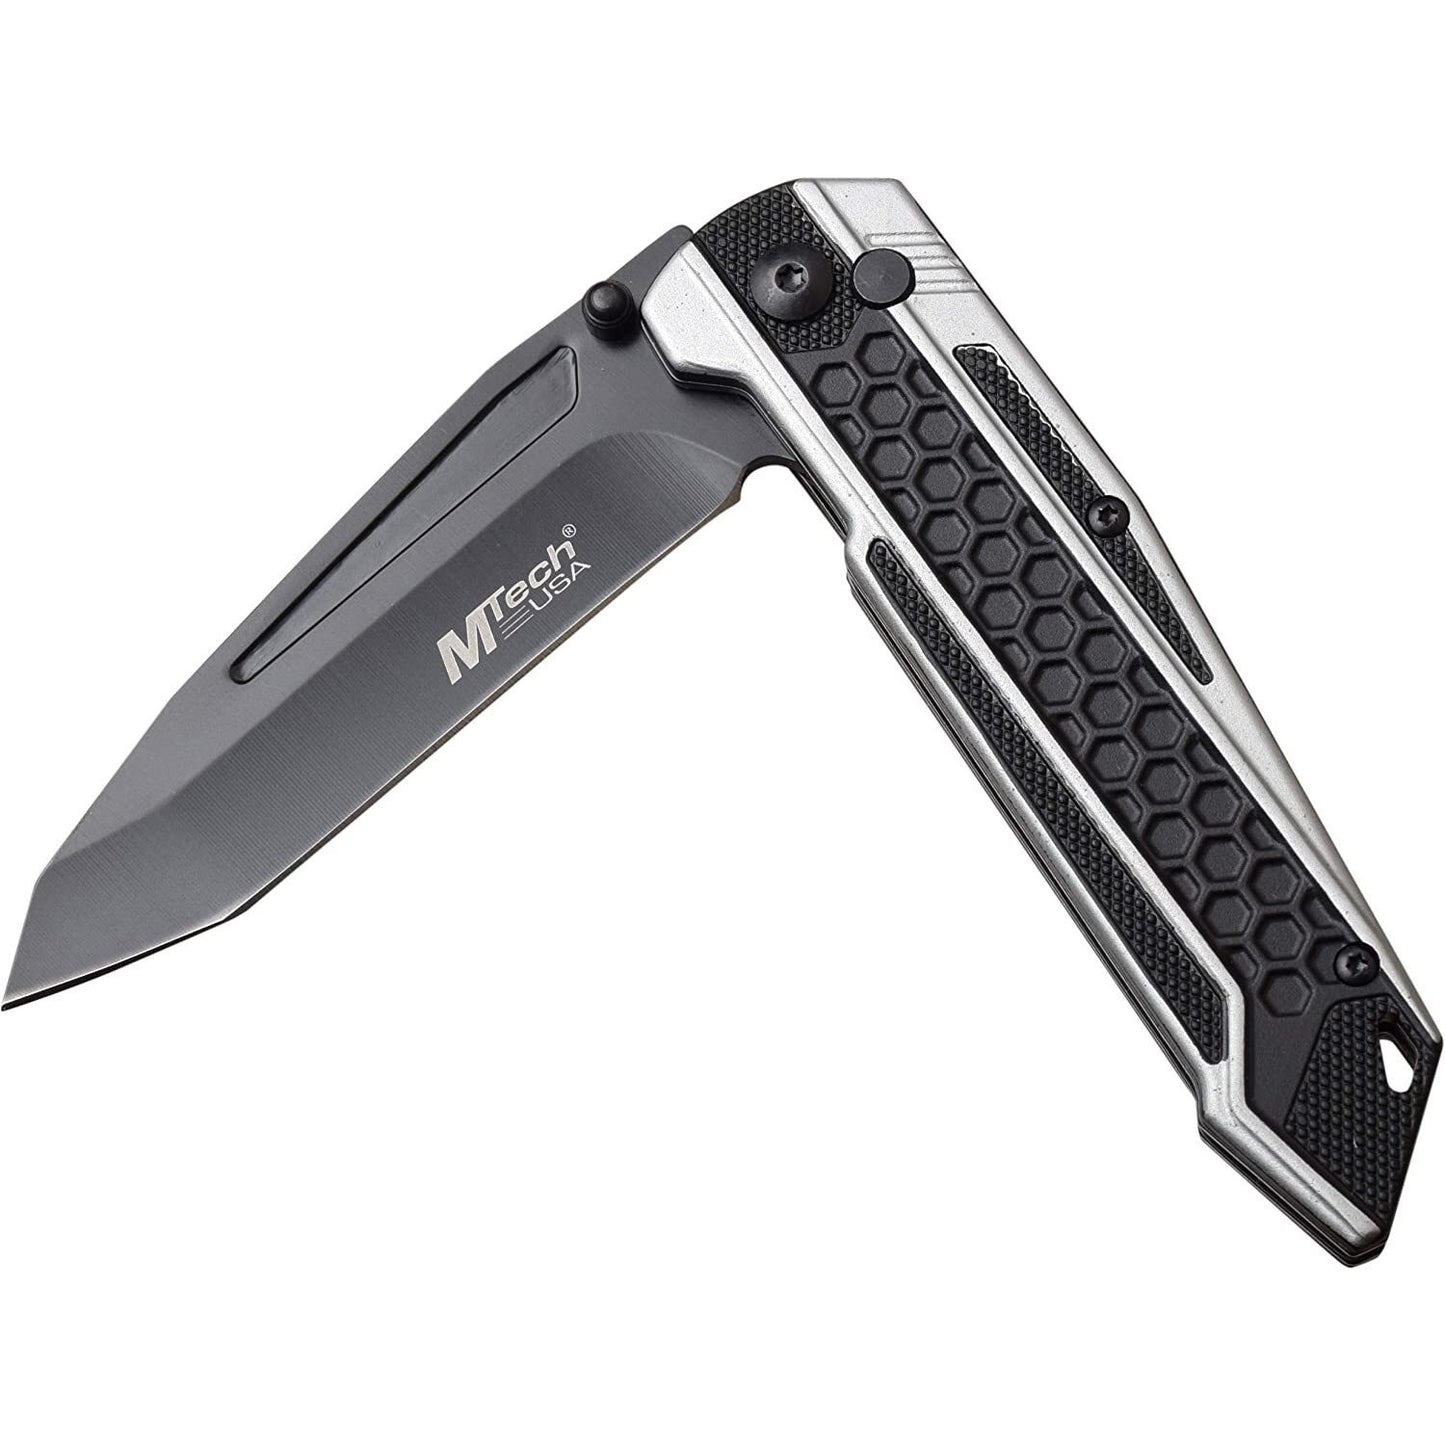 Mtech Mtech Tactical Tanto Fine Edge Blade Folding Knife - Gray Two Tone Anodized Aluminum Handle #mt-1135Gy Dim Gray